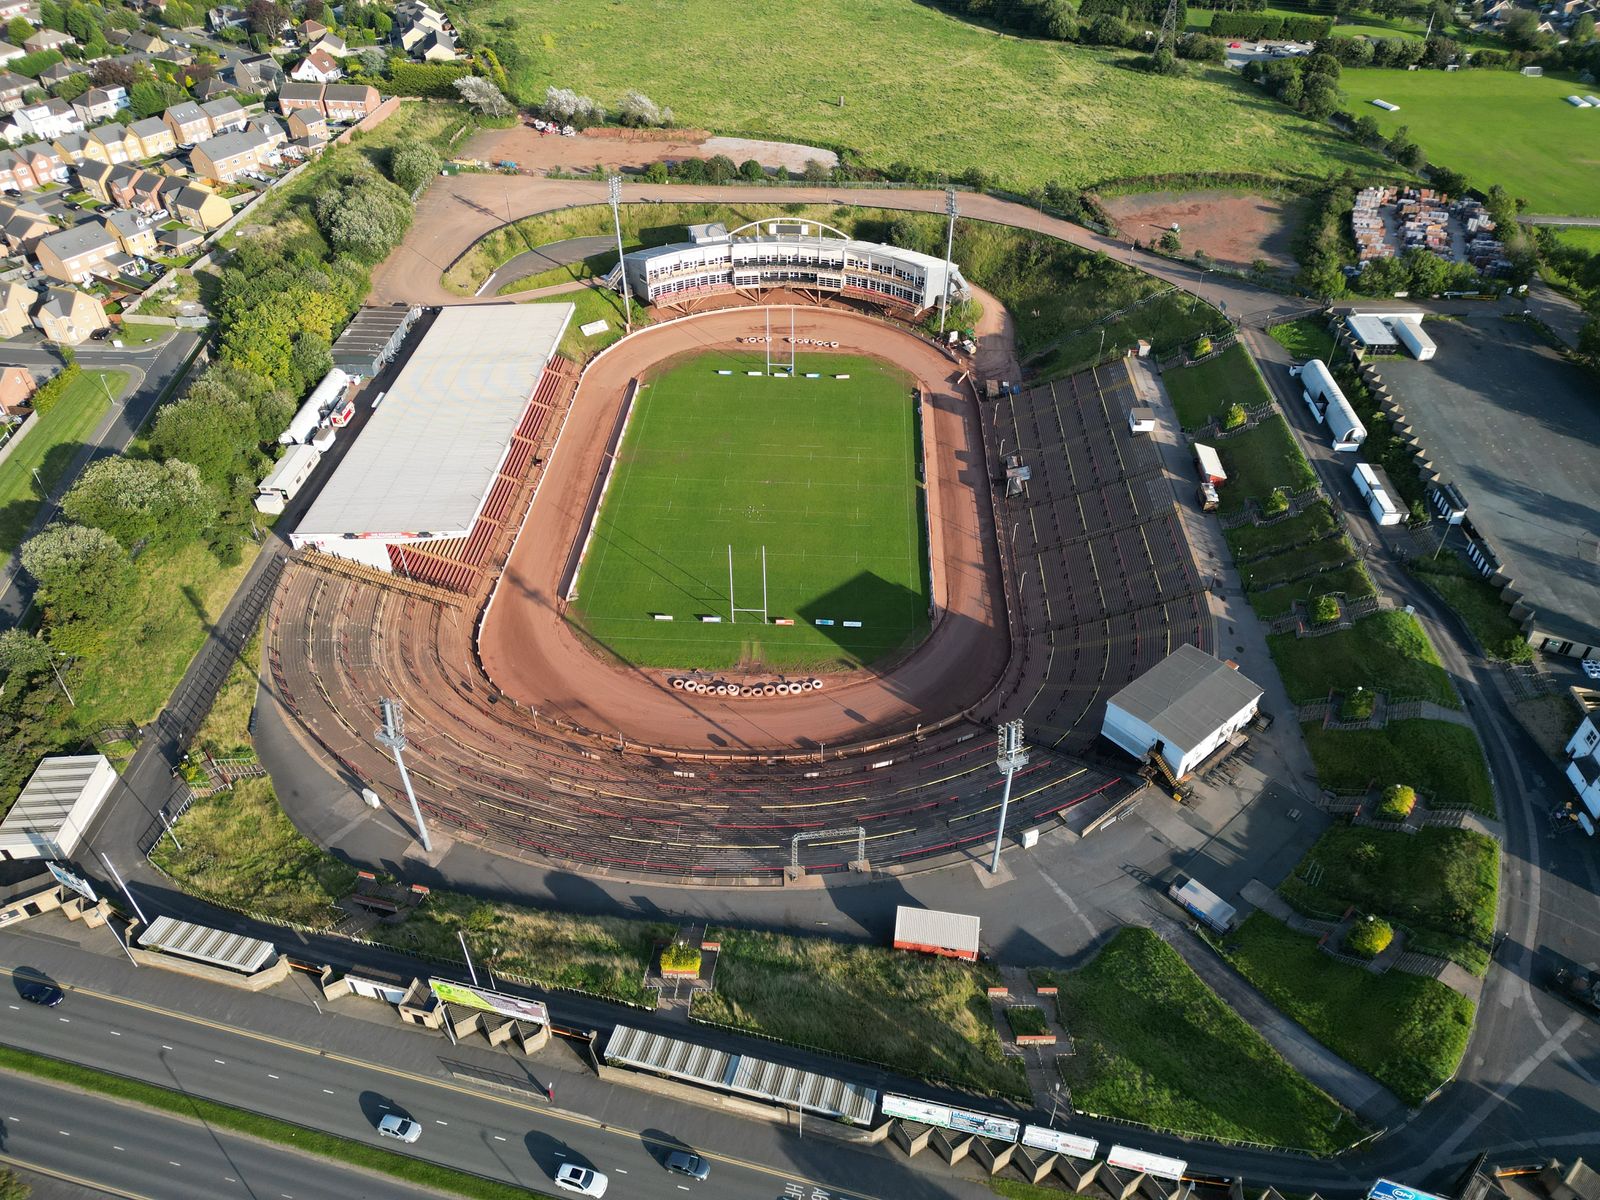 Knight Frank call for best bids for Odsal lease